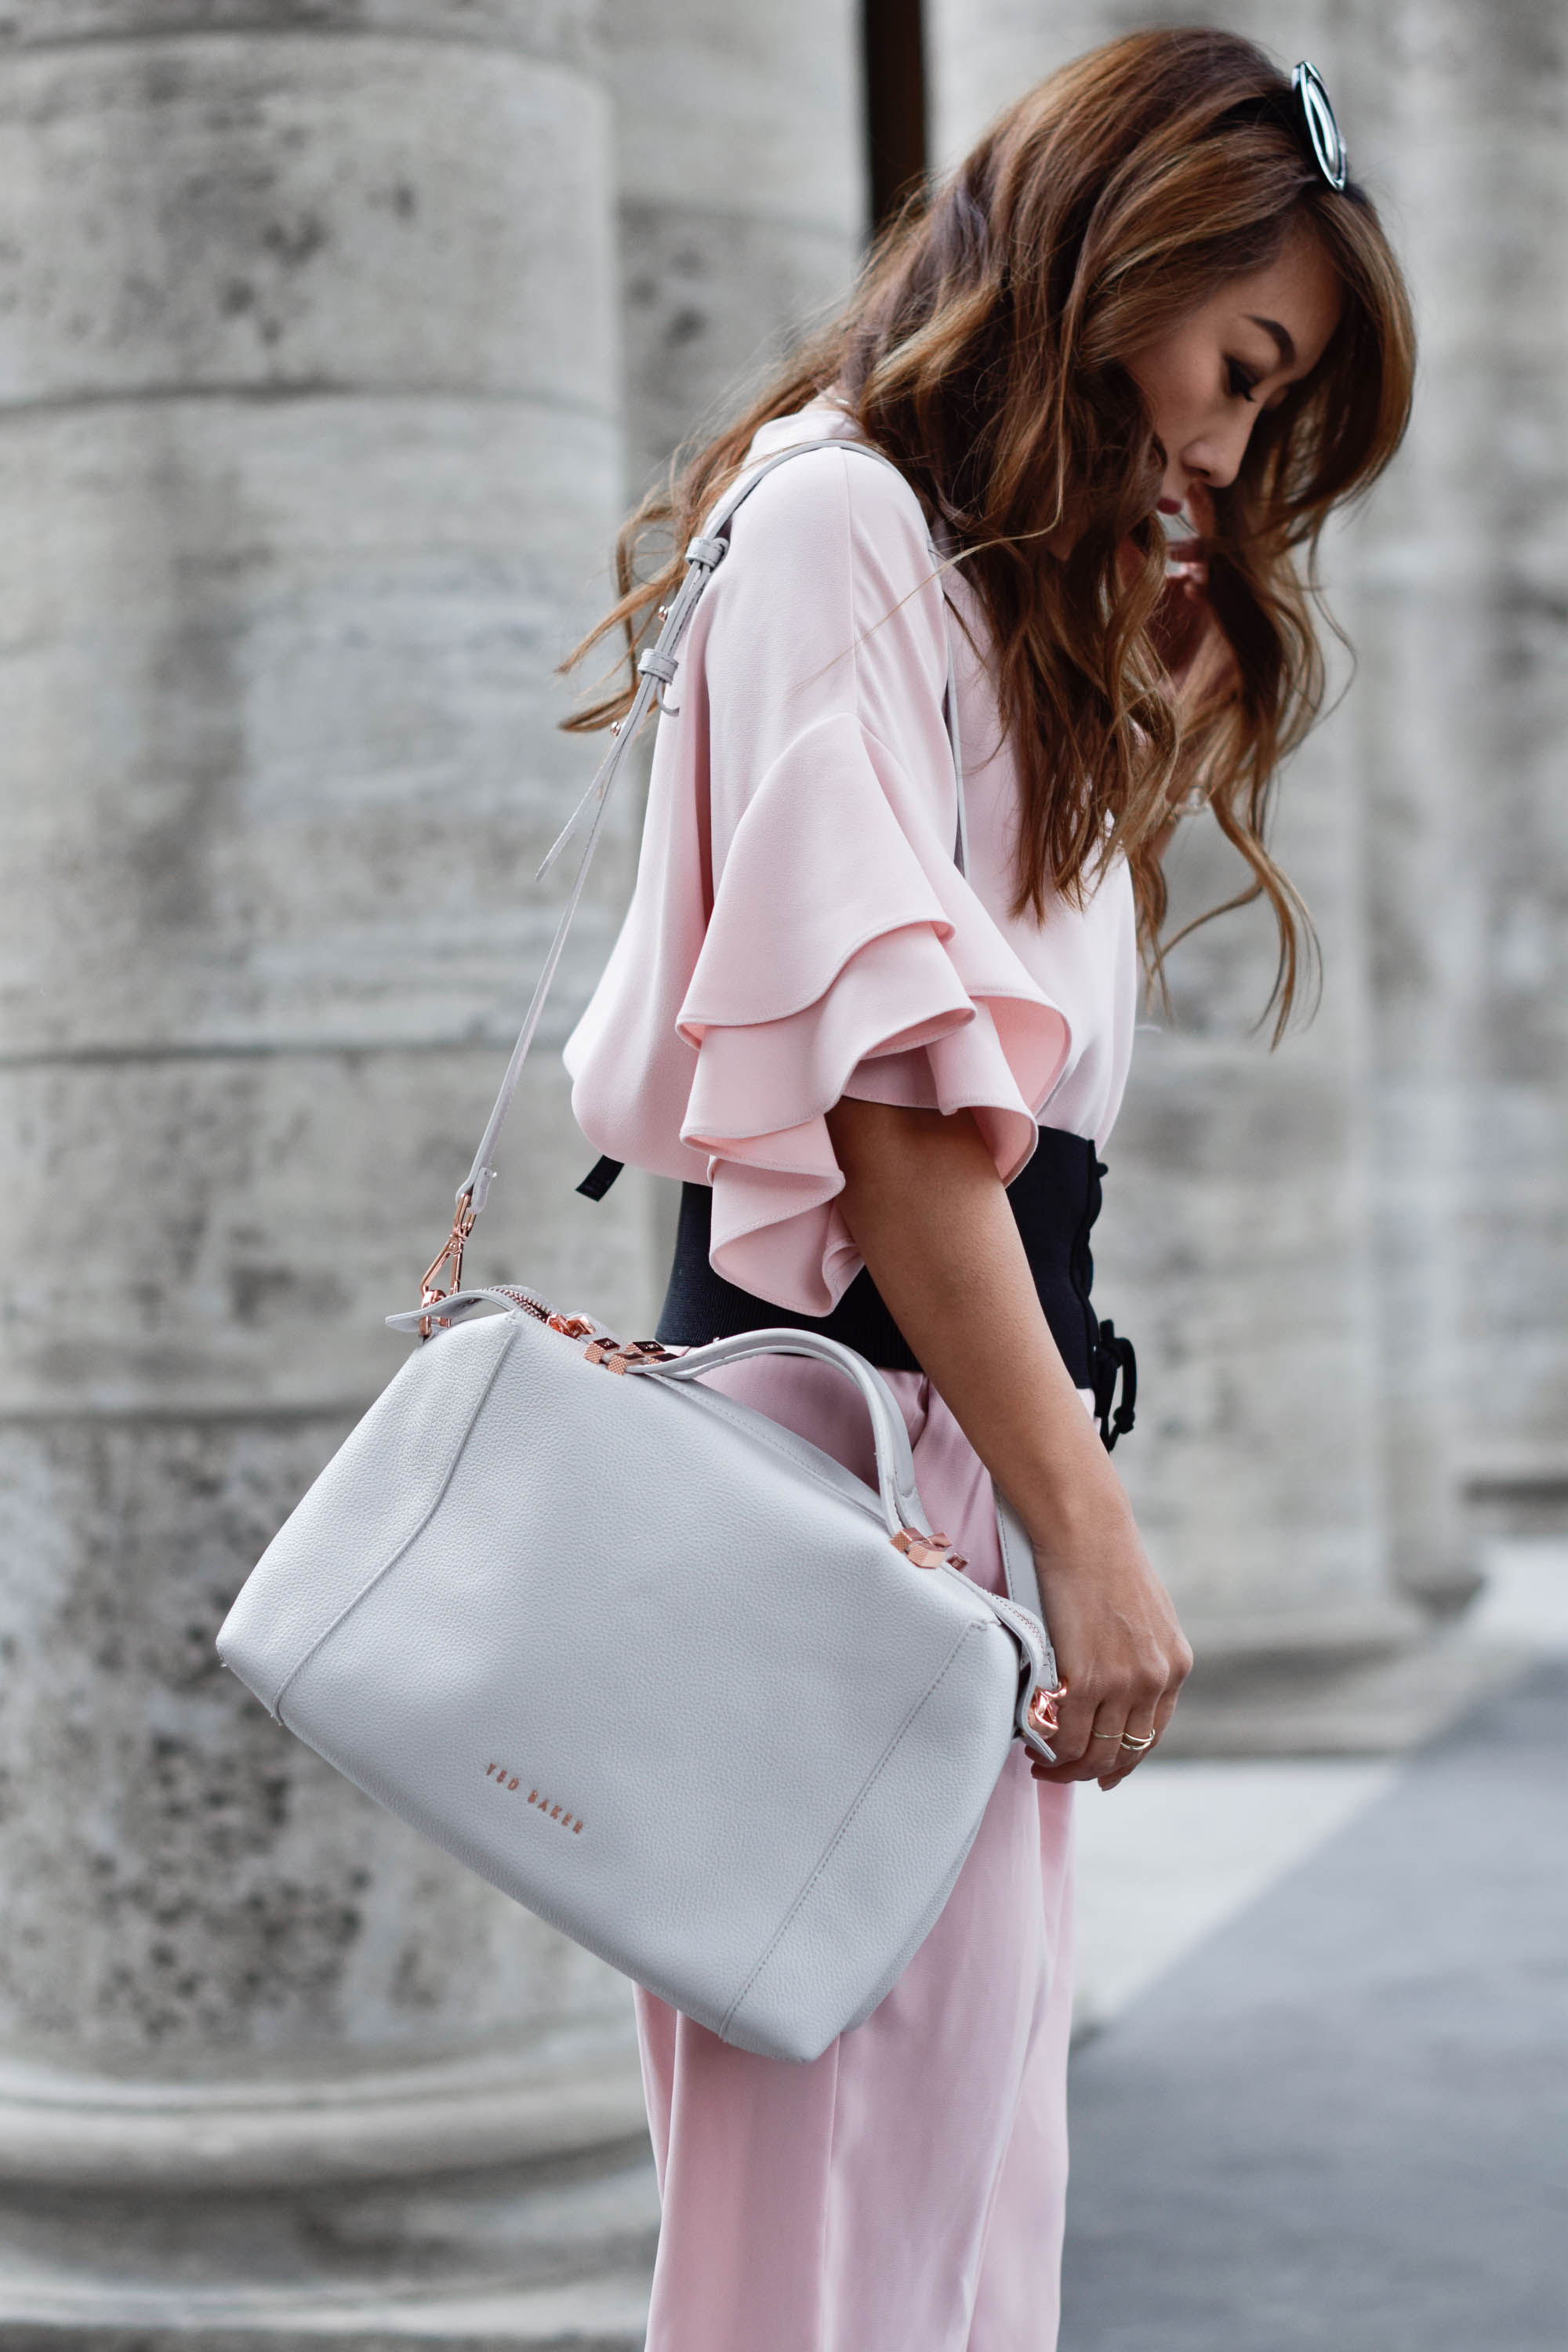 Ready for spring in blush and grey